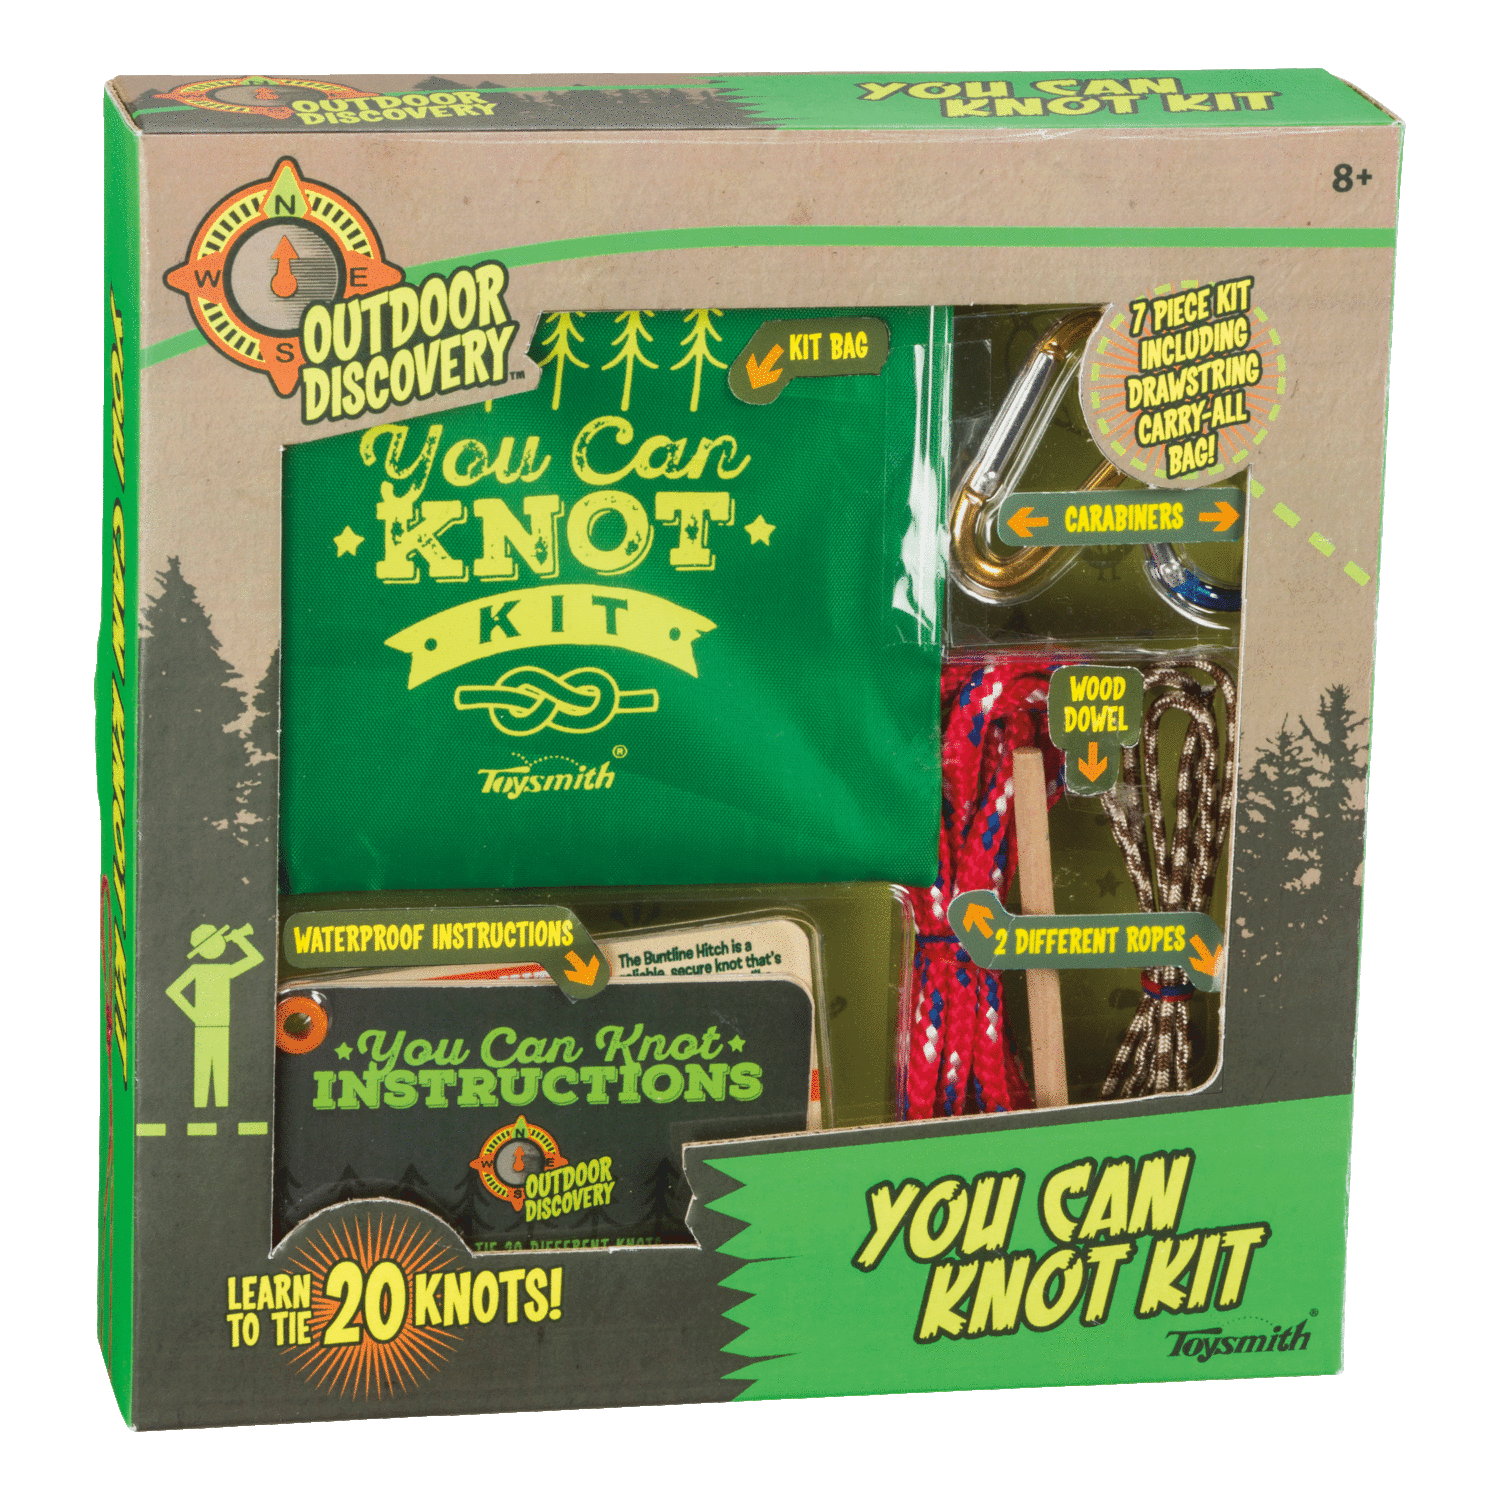 SALE: You Can Knot Kit - org. $9.99